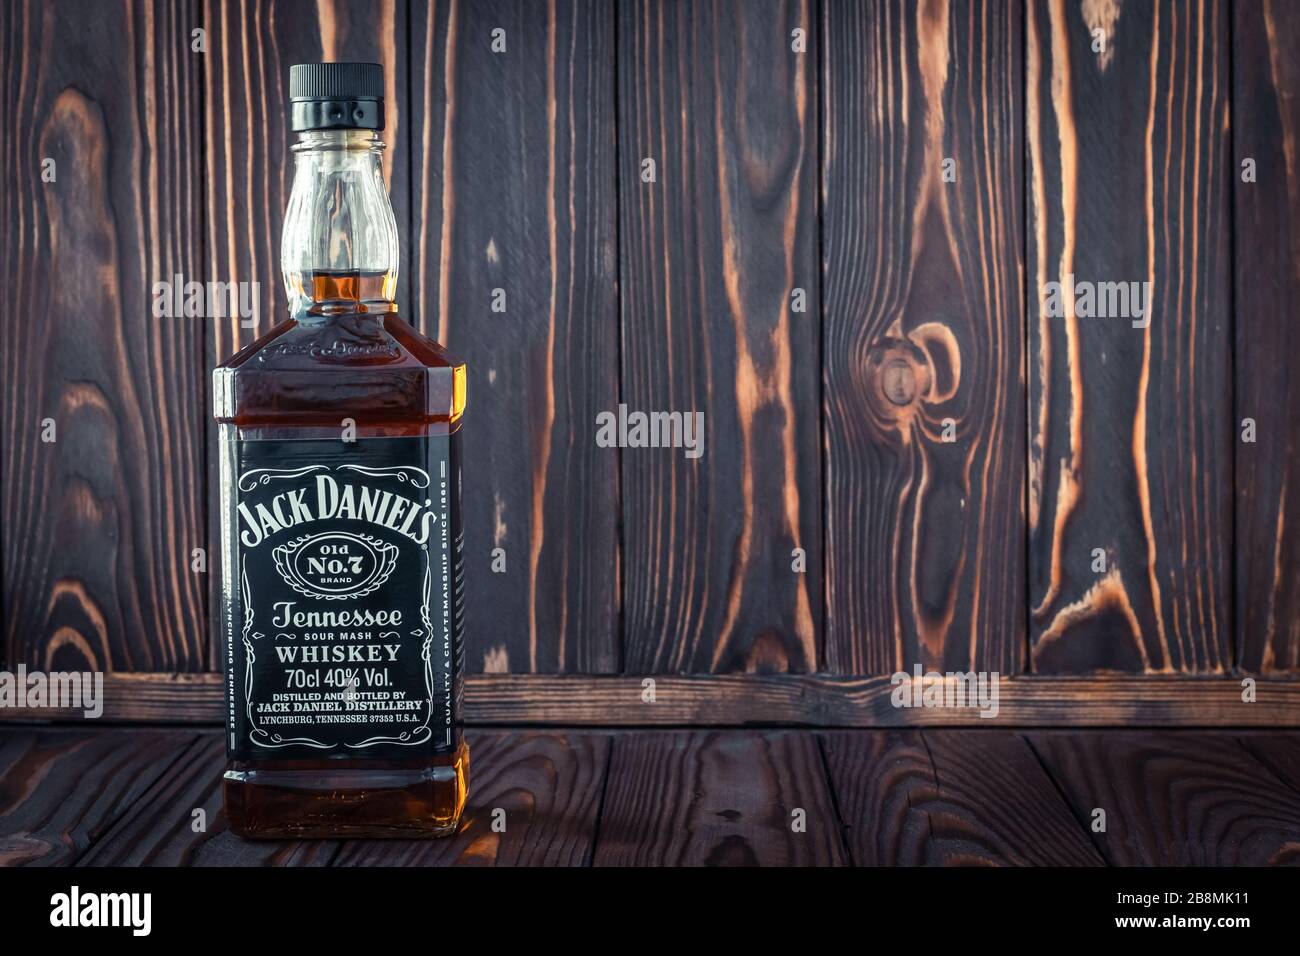 Jack Daniels Bottle High Resolution Stock Photography and Images - Alamy